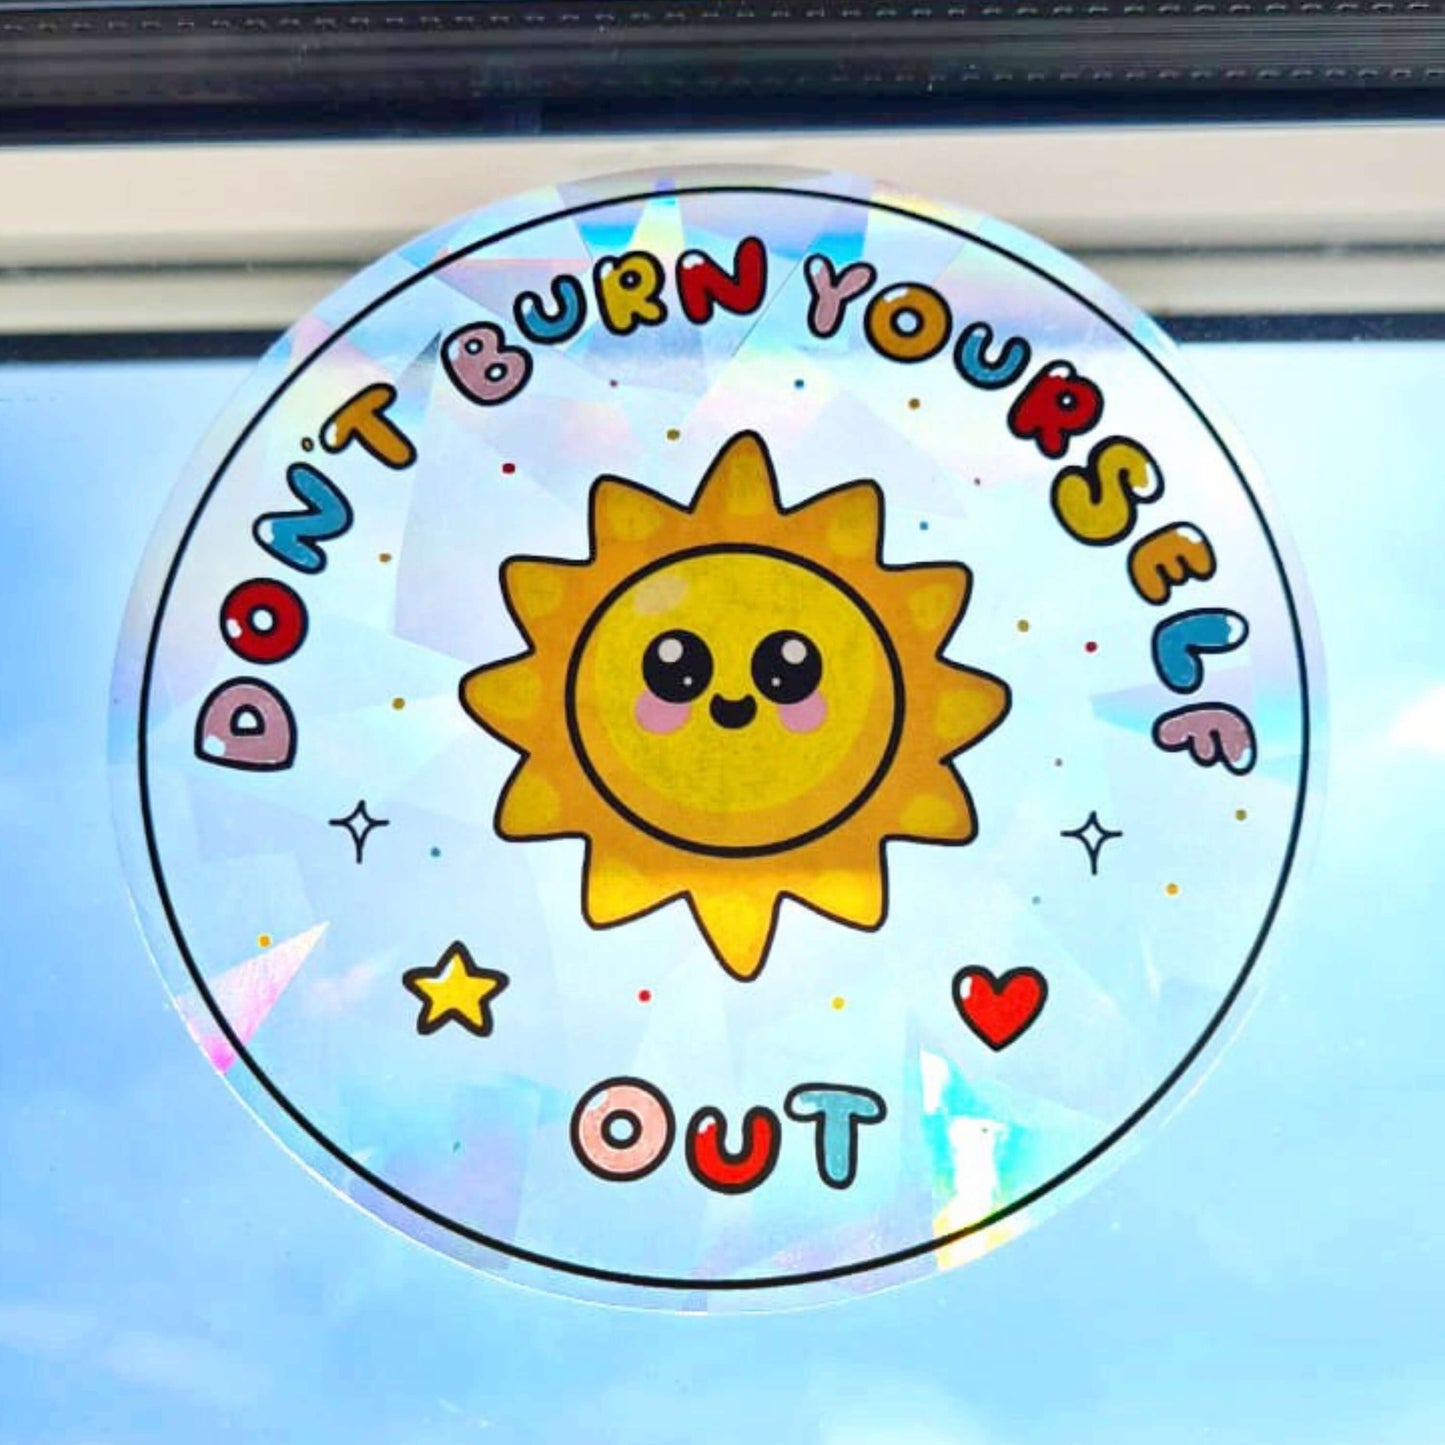 The Don't Burn Yourself Out Sun Catcher Rainbow Window Sticker stuck on a window with blue skies behind. The circle holographic sticker features a smiling sunshine with pink blush in the middle with rainbow bubble writing reading 'don't burn yourself out' with a yellow star, red heart, black sparkle outlines and rainbow dots all over. The design is inspired by self care.